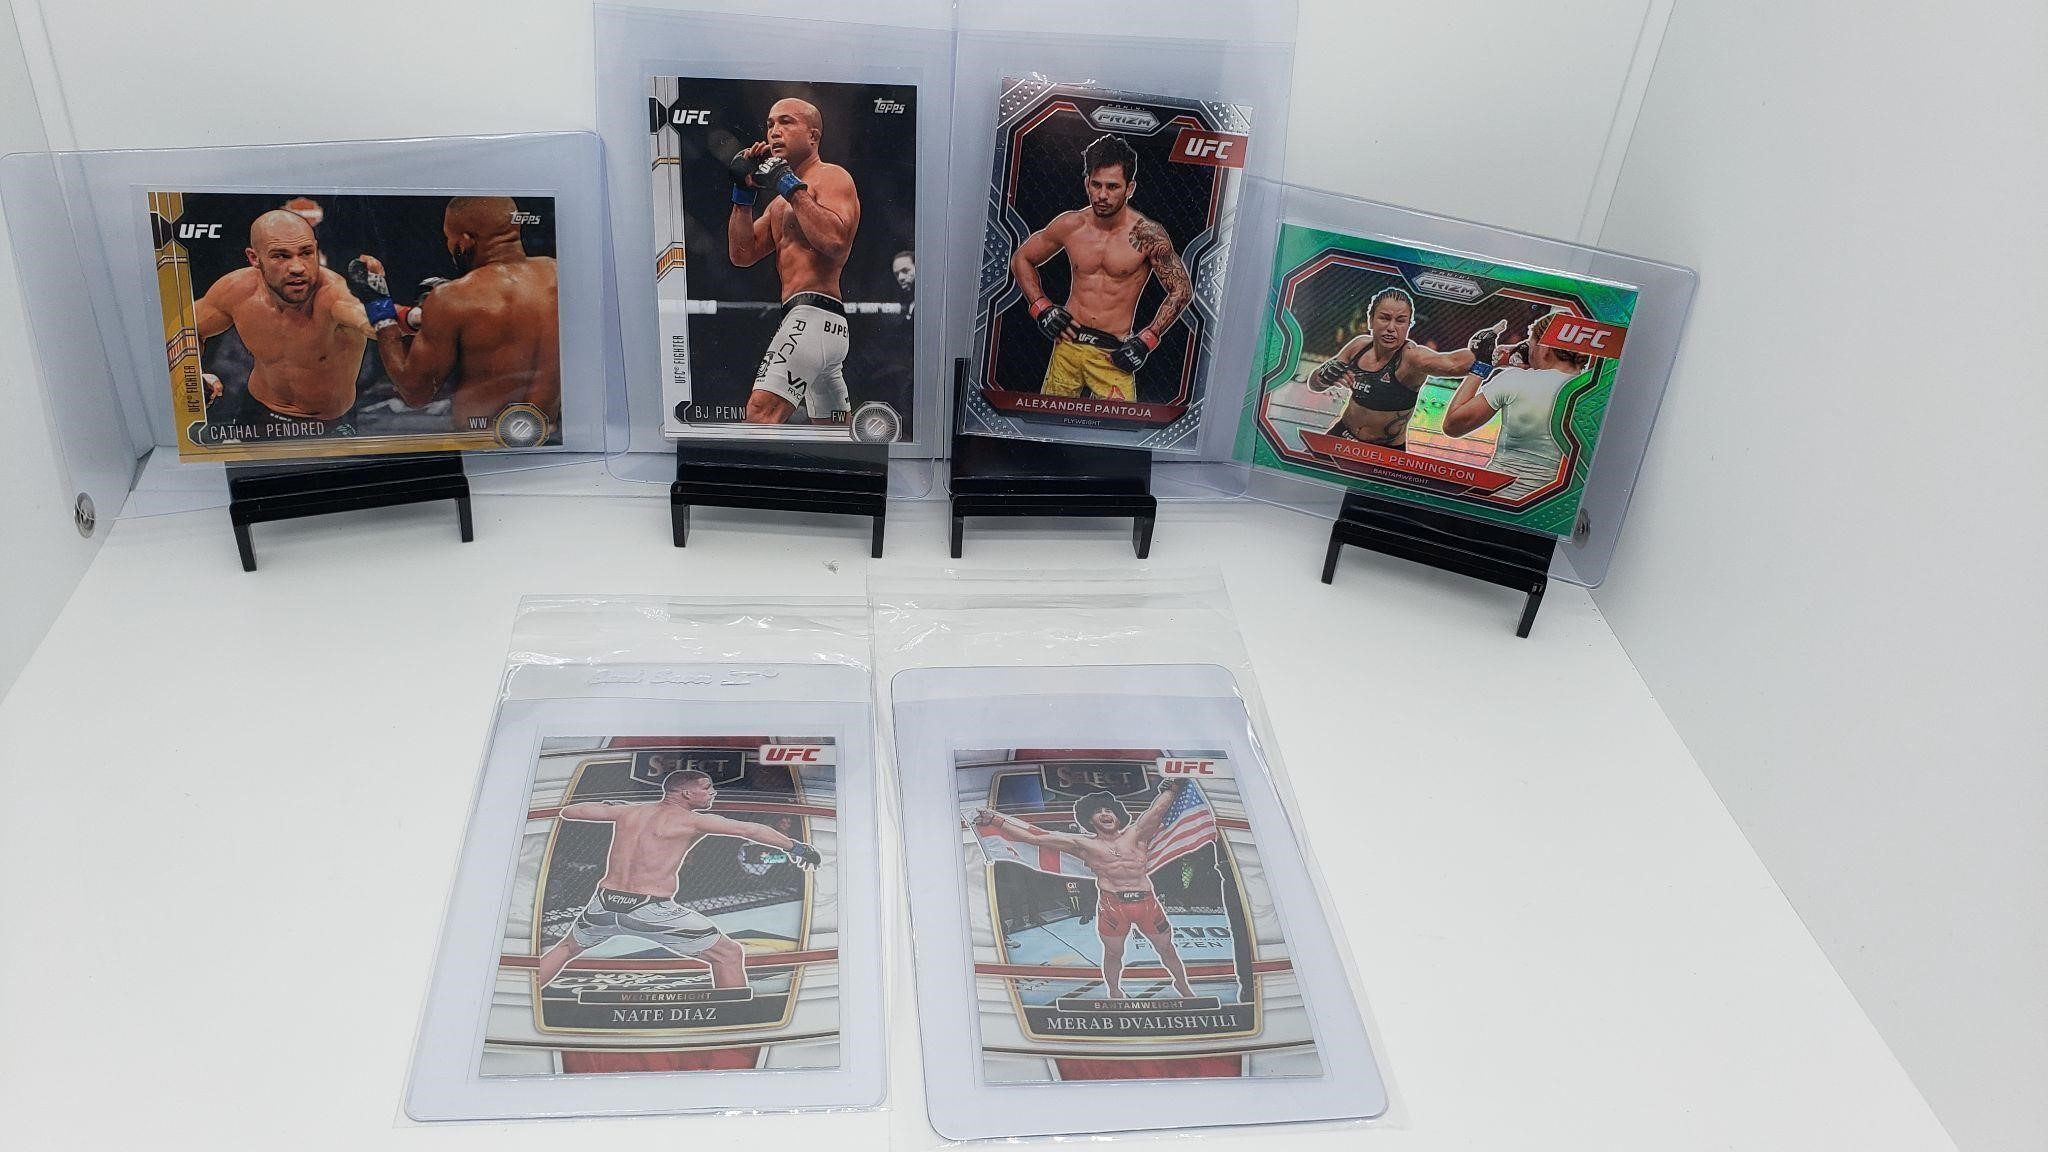 Consignment Collectibles